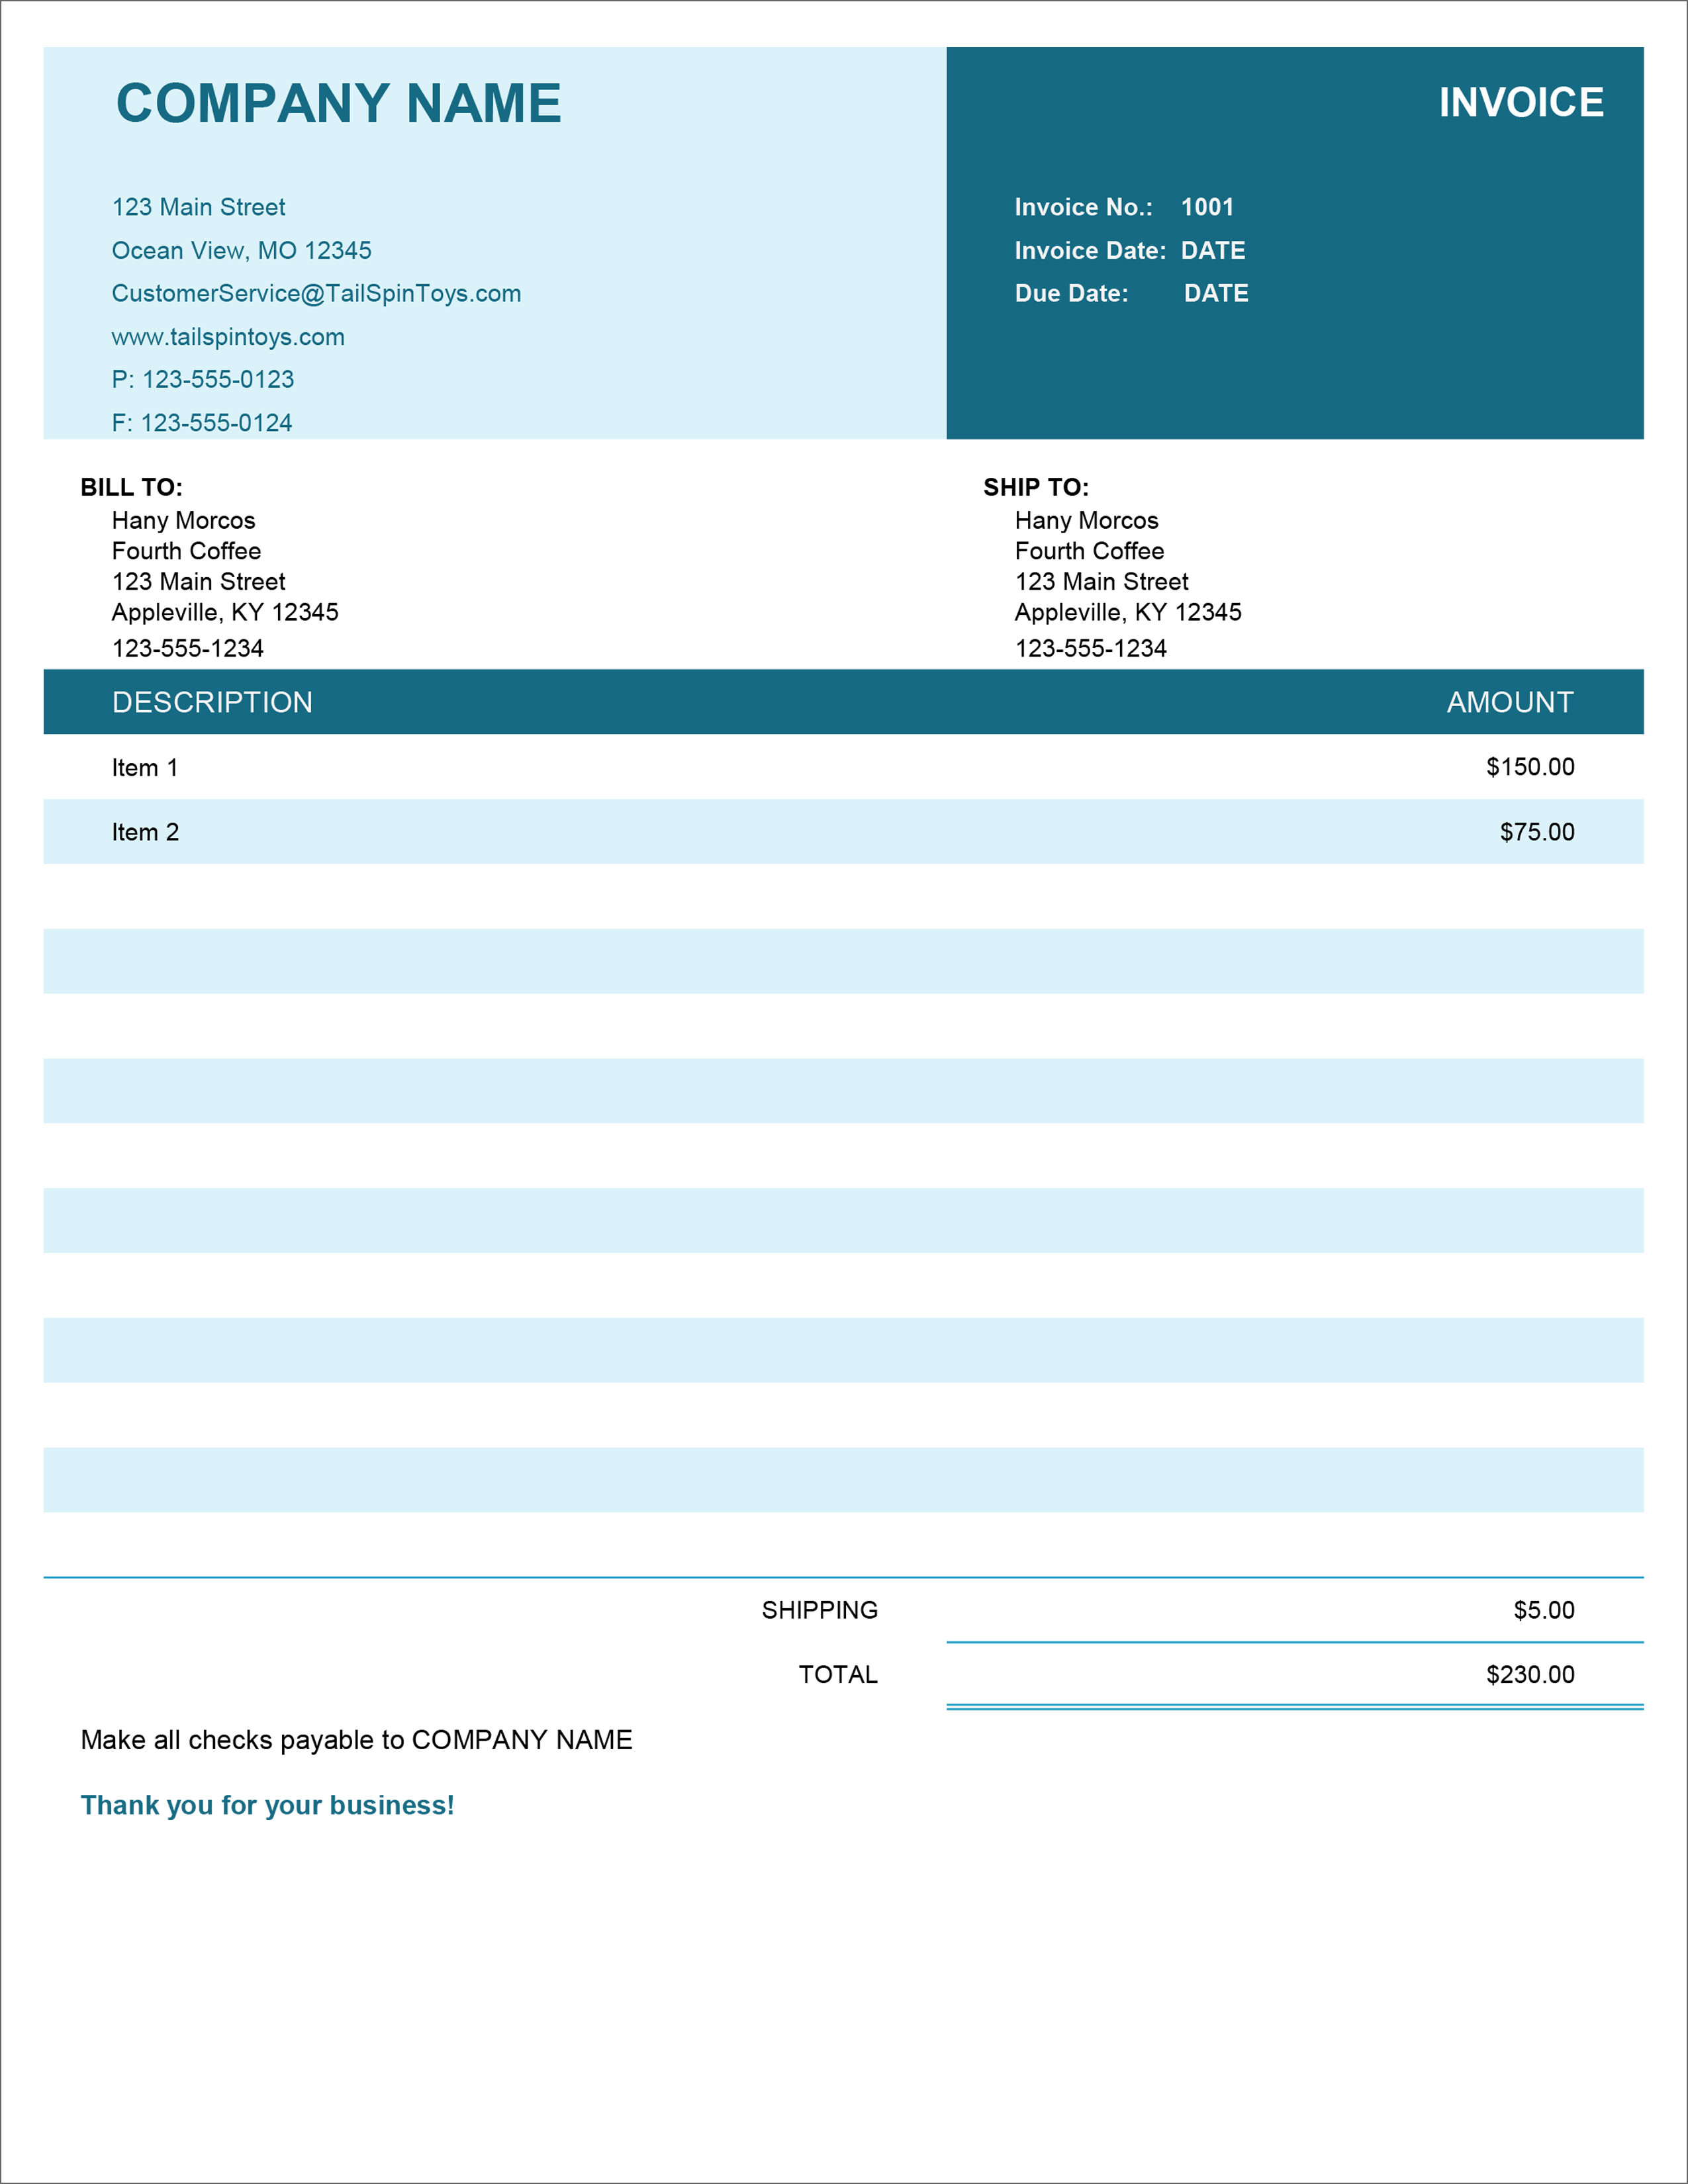 23 Free Invoice Templates In Microsoft Excel And DOCX Formats For Invoice Template Excel 2013